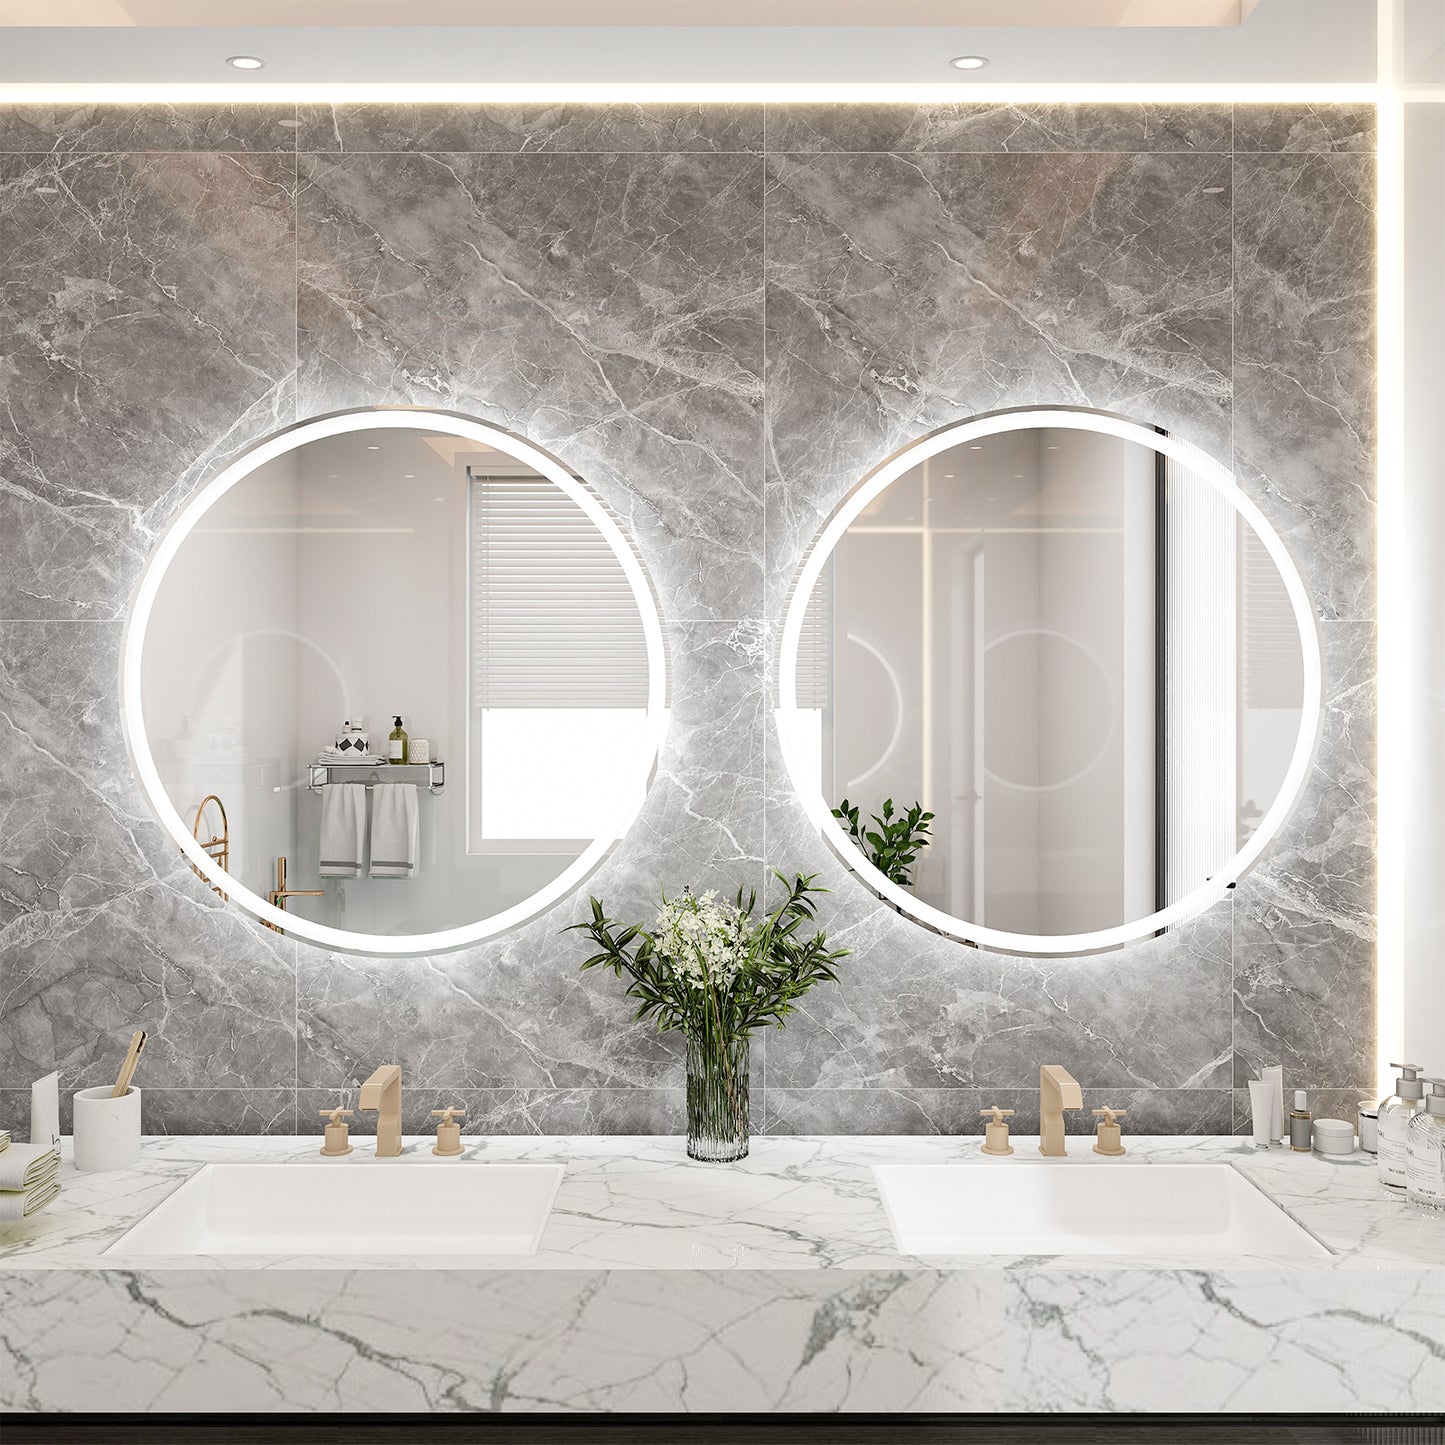 24 Inch Round Backlit Bathroom Mirror, LED round mirror with lighting strip, waterproof LED strip with adjustable 3-color and dimmable lighting,Touch Control, Vanity Mirror